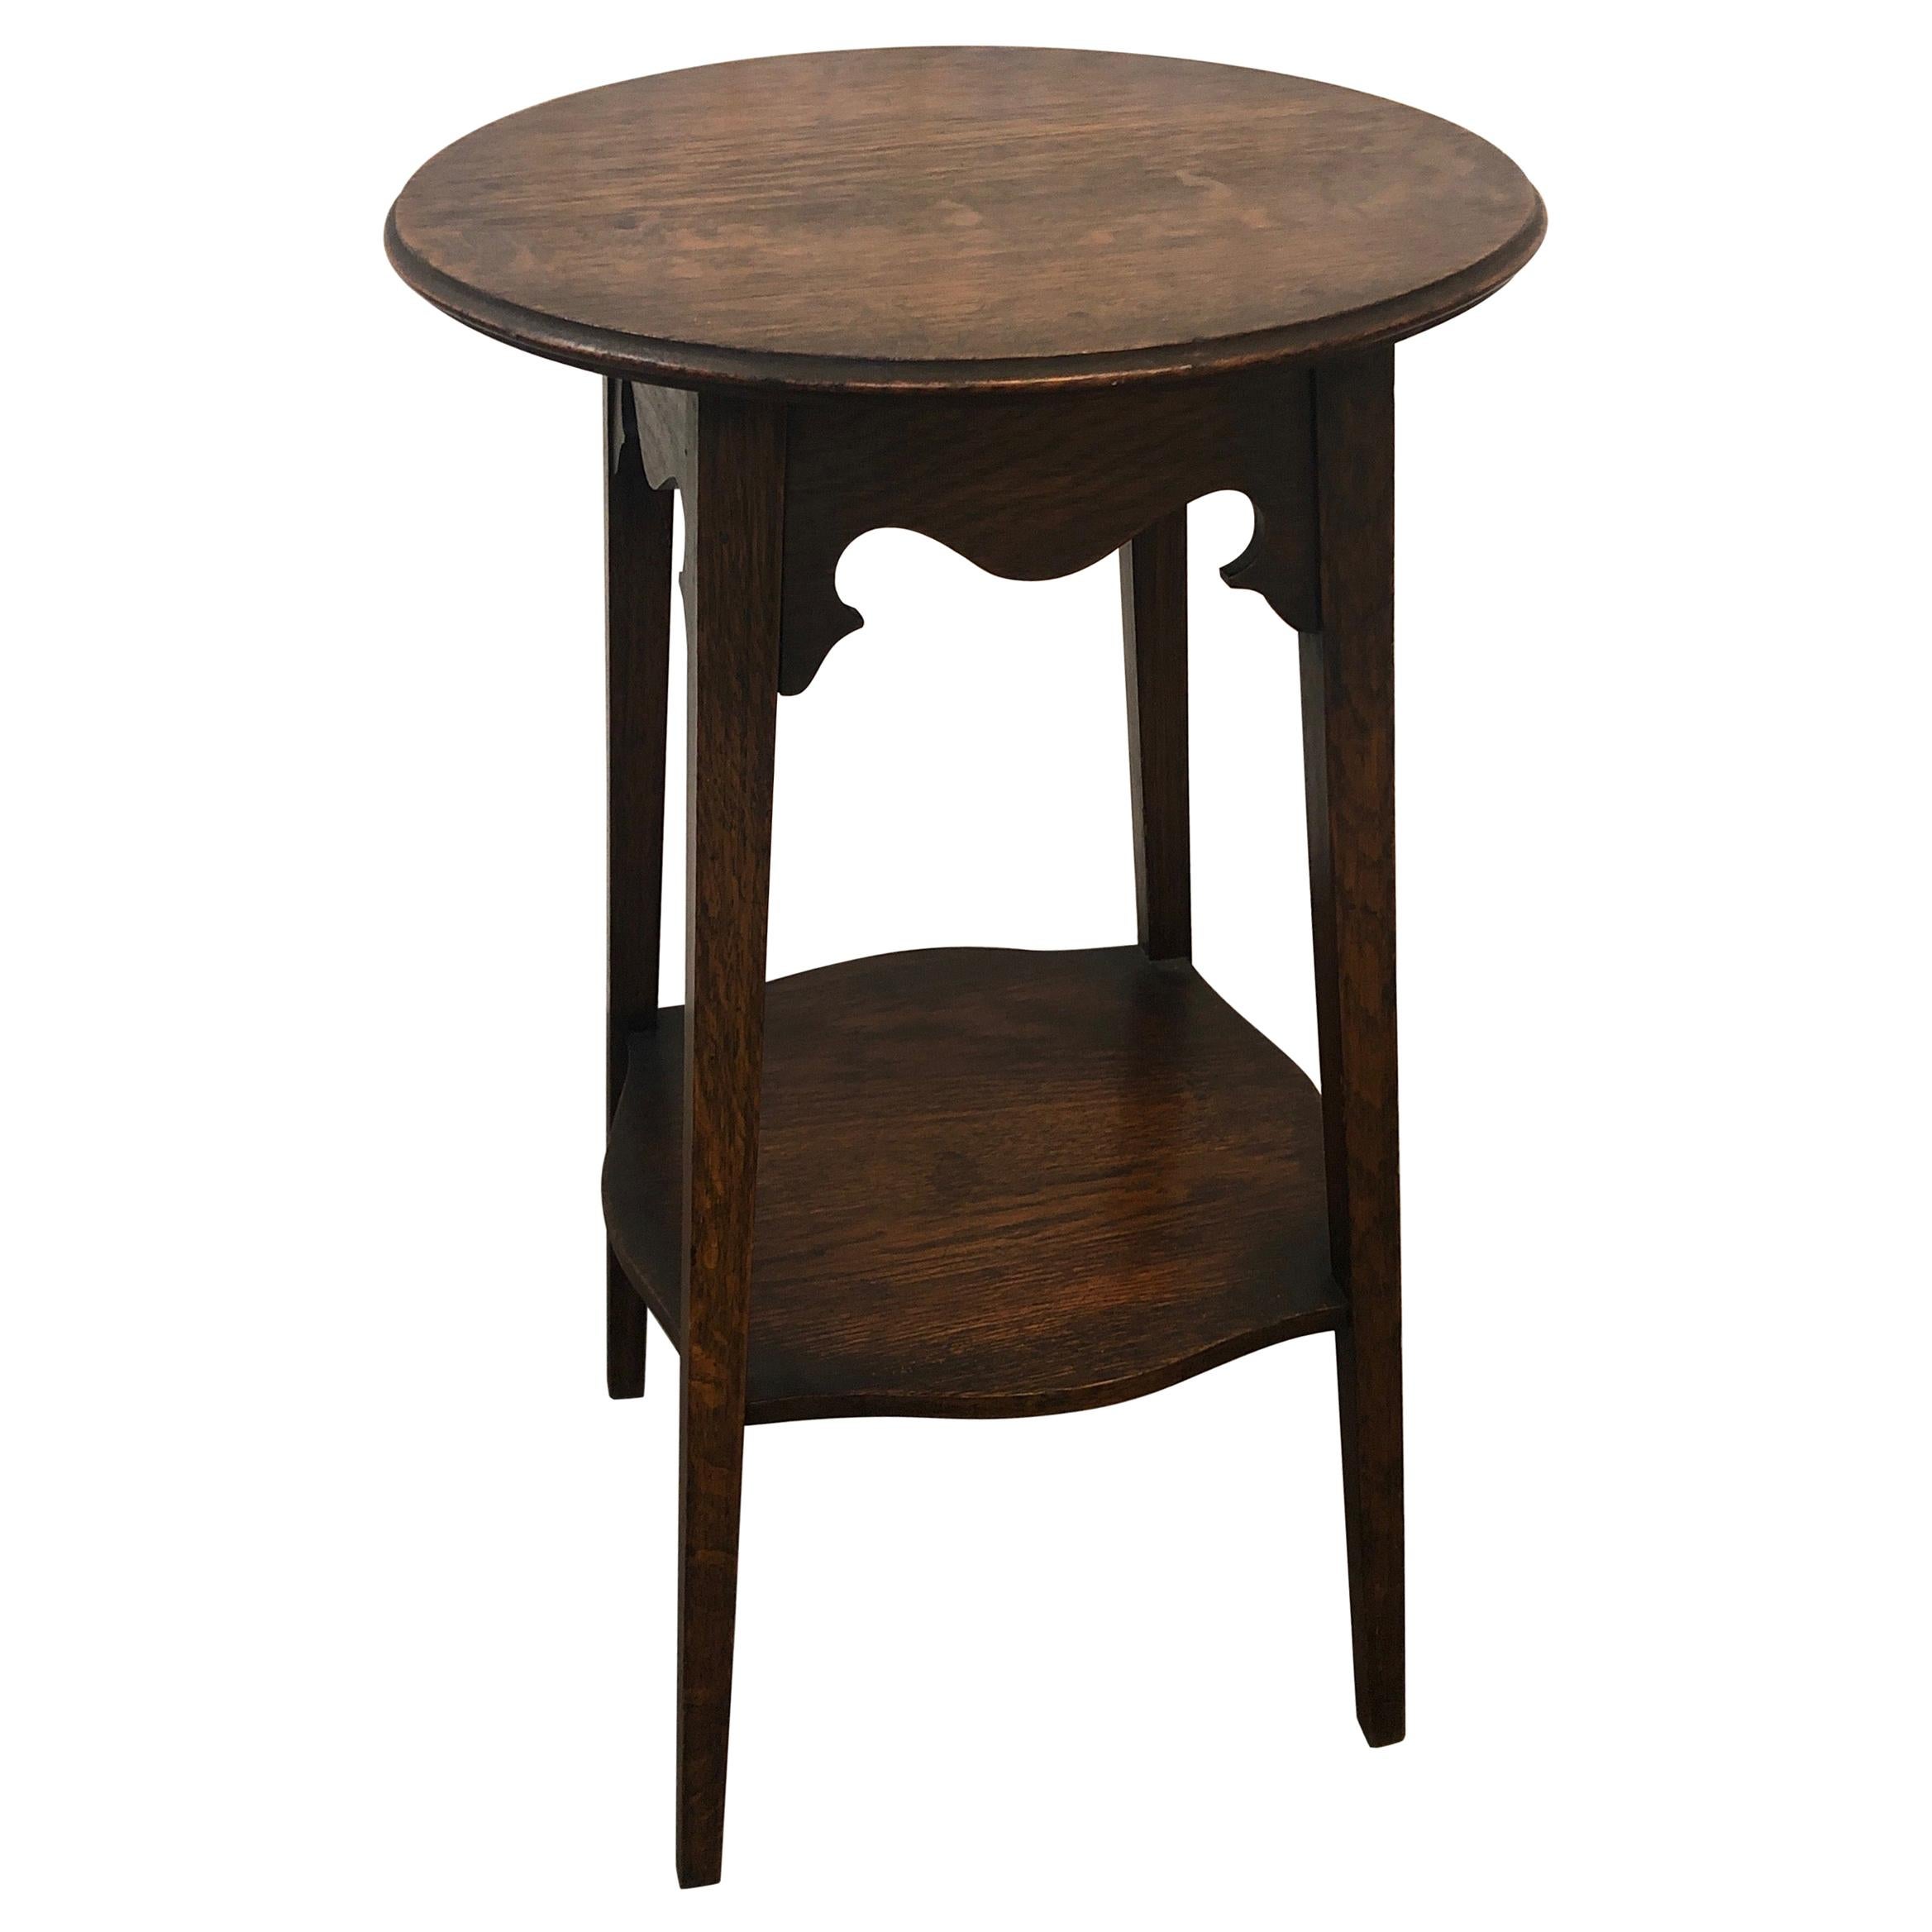 Arts & Crafts Round Side Table from Pioneer Furniture Stores Ltd.